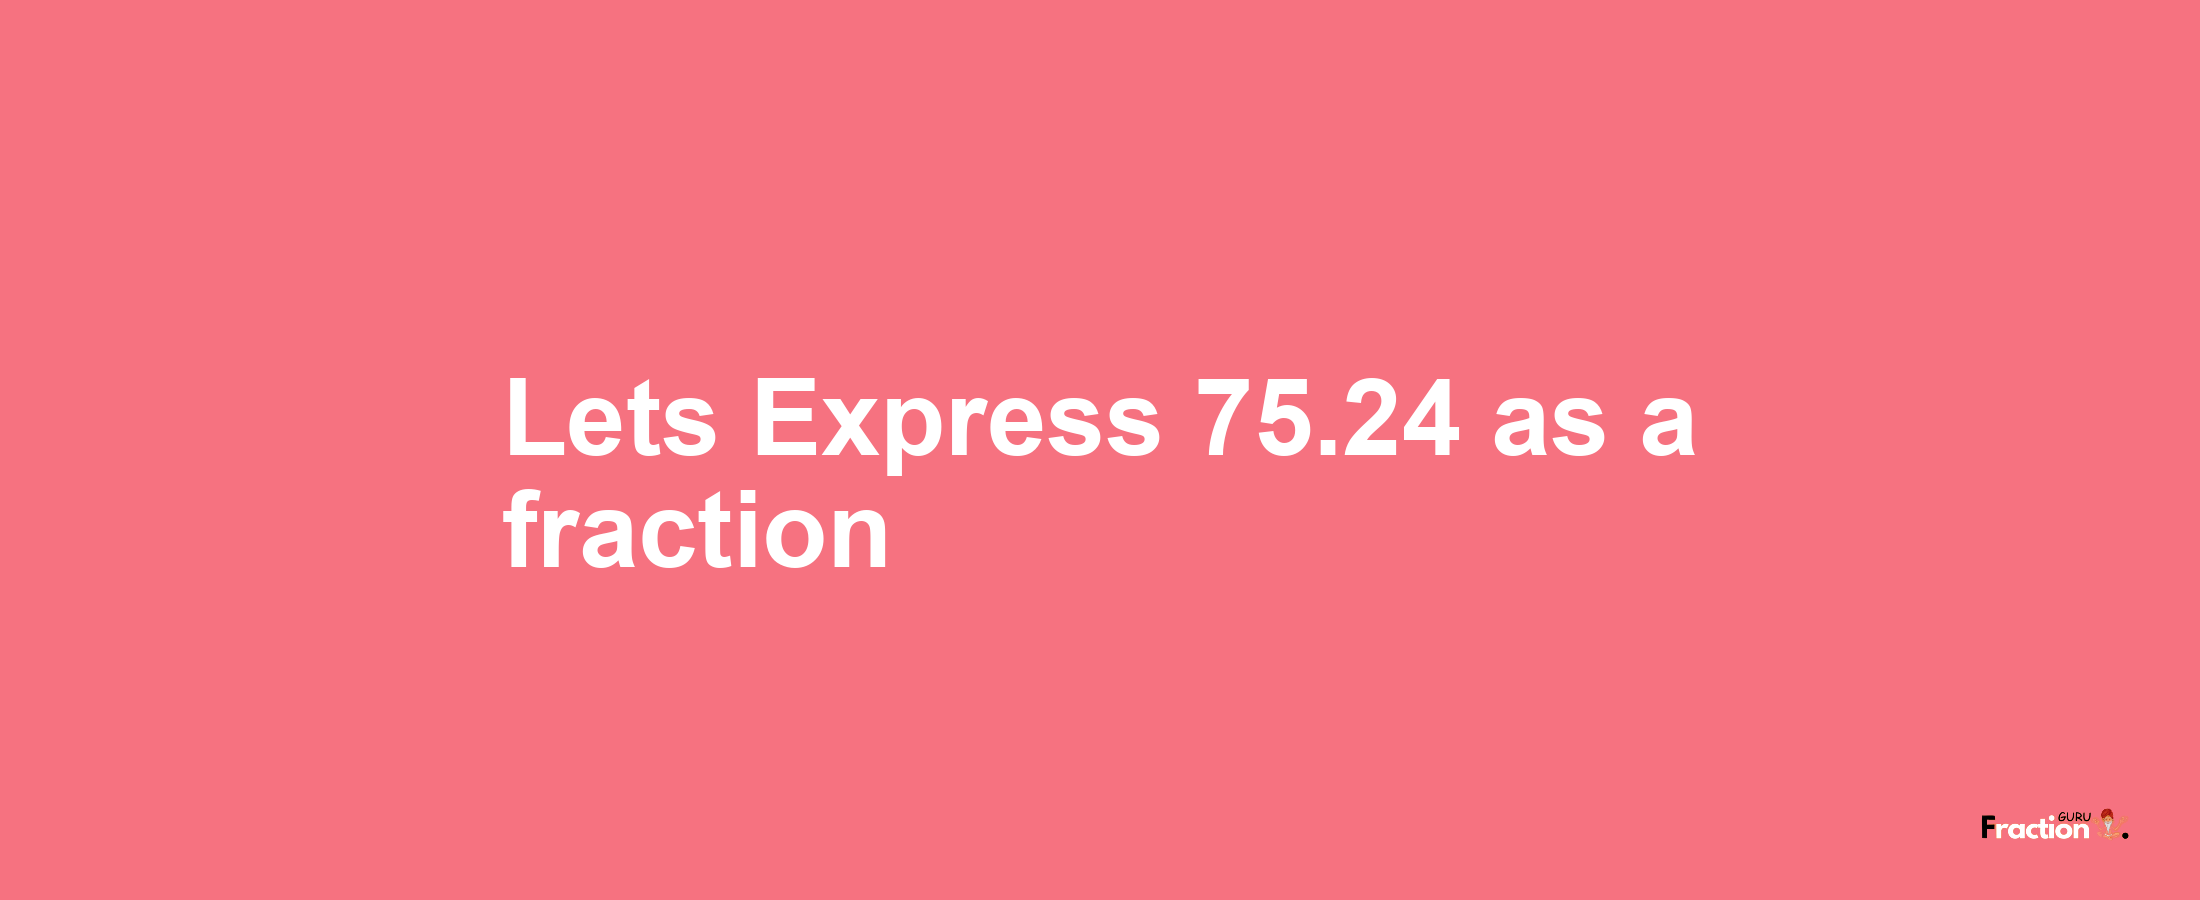 Lets Express 75.24 as afraction